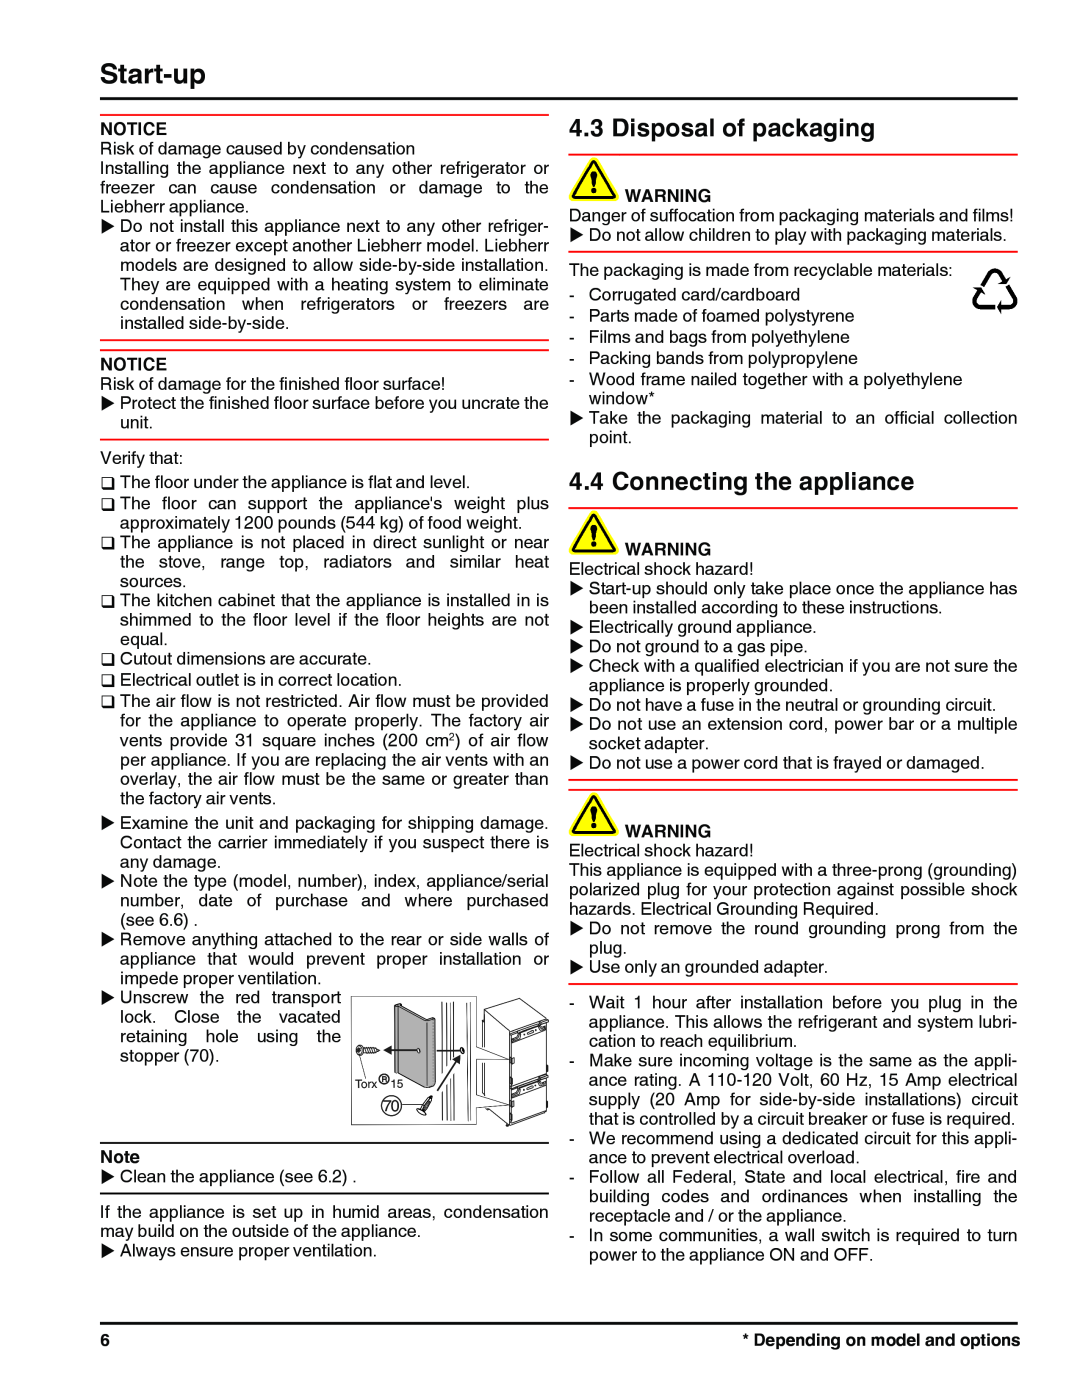 Liebherr HC 1011/1060 HC 1001/1050 121113 7082698 - 00 manual Start-up, Disposal of packaging, Connecting the appliance 